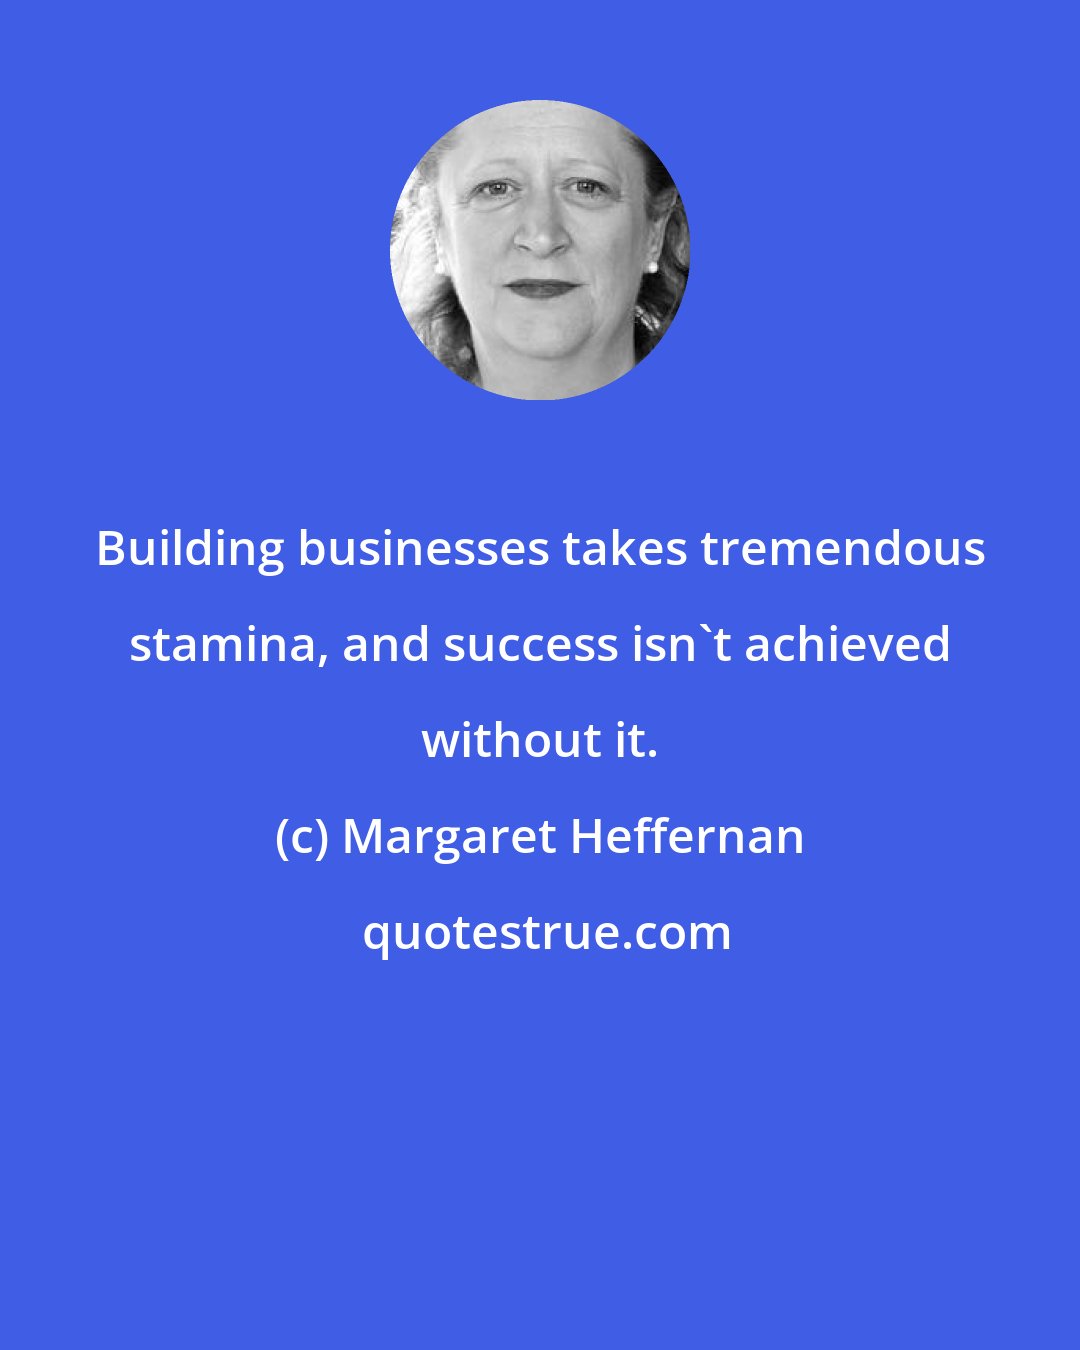 Margaret Heffernan: Building businesses takes tremendous stamina, and success isn't achieved without it.